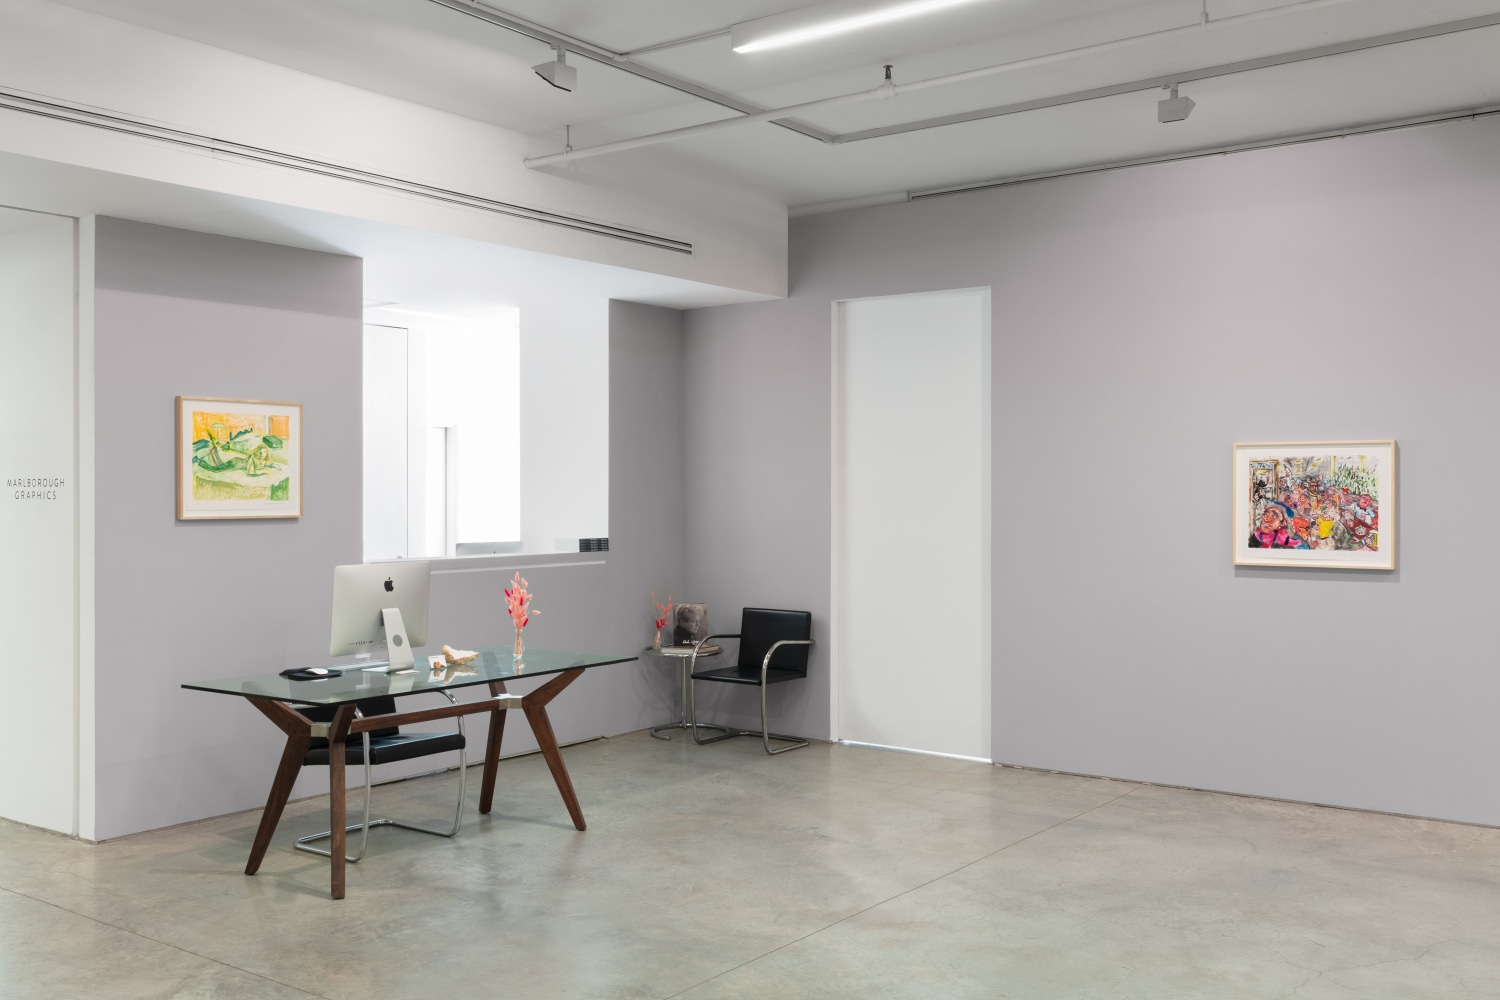 Installation View. Photo: Pierre Le Hors